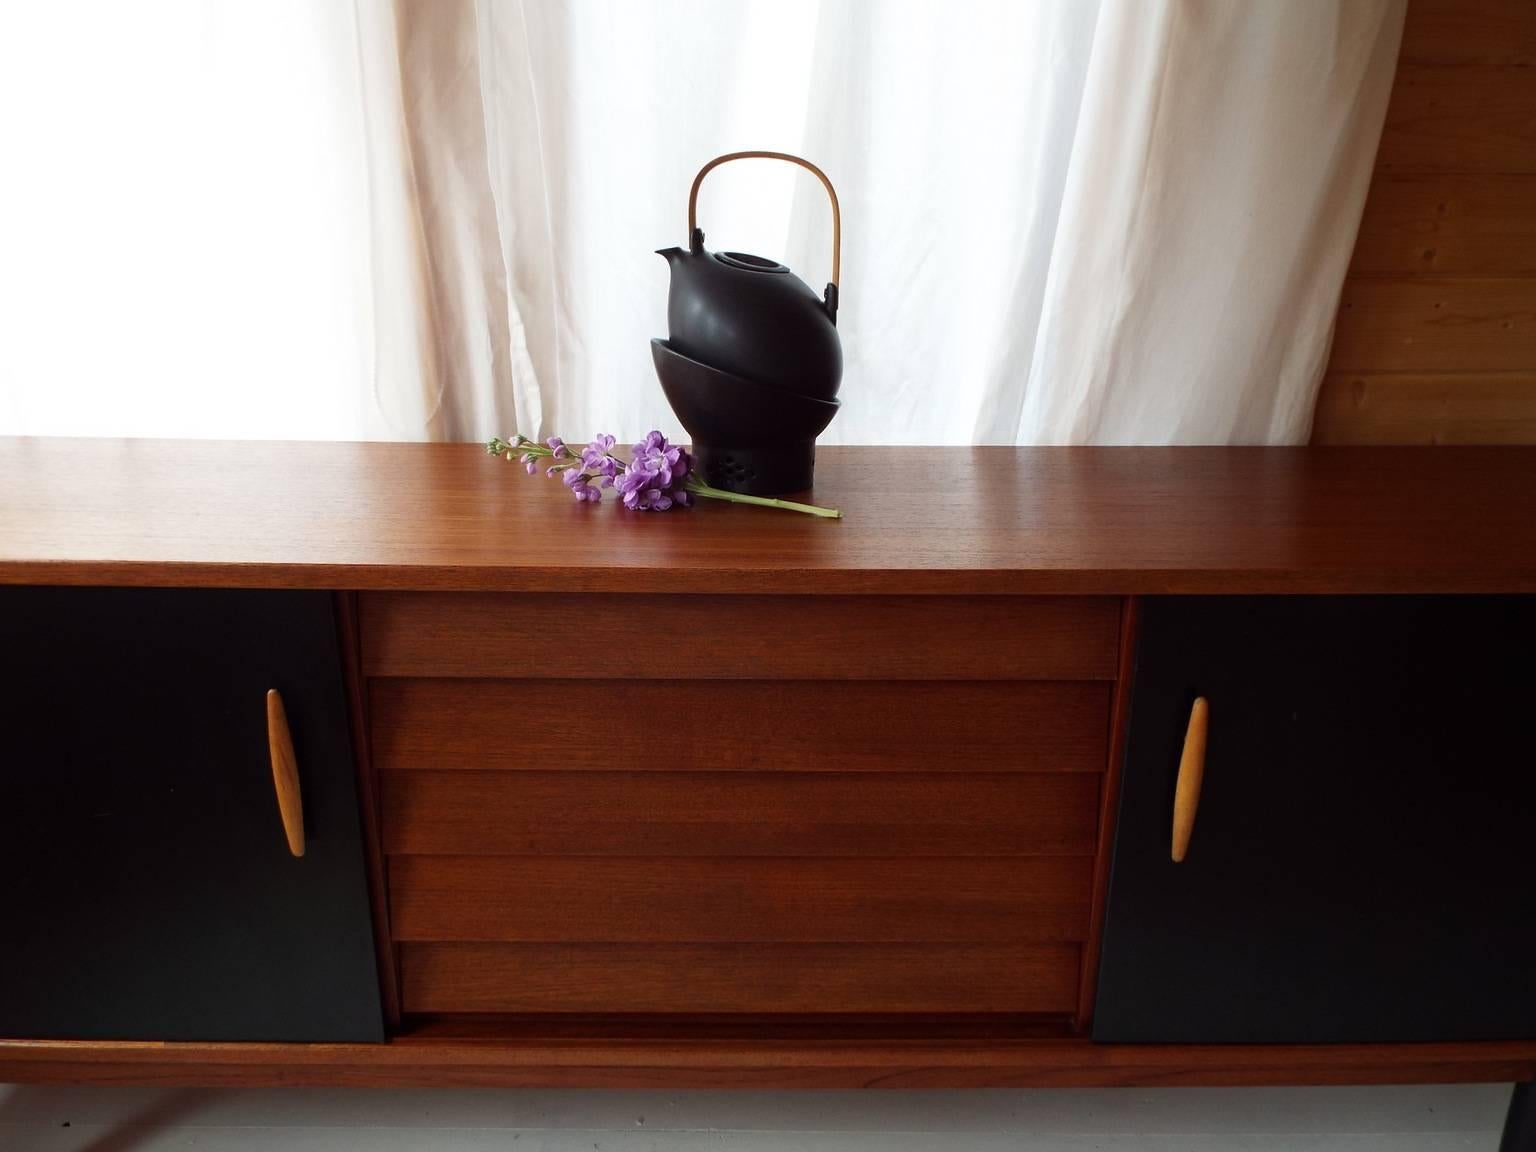 HC Studio are pleased to offer a wonderful example of 1960s Swedish design in this teak and lacquered finish Troeds Bjarnum Sideboard. Designed by leading architect Nils Jonsson, the sideboard offers a fusion of form and functionality for followers